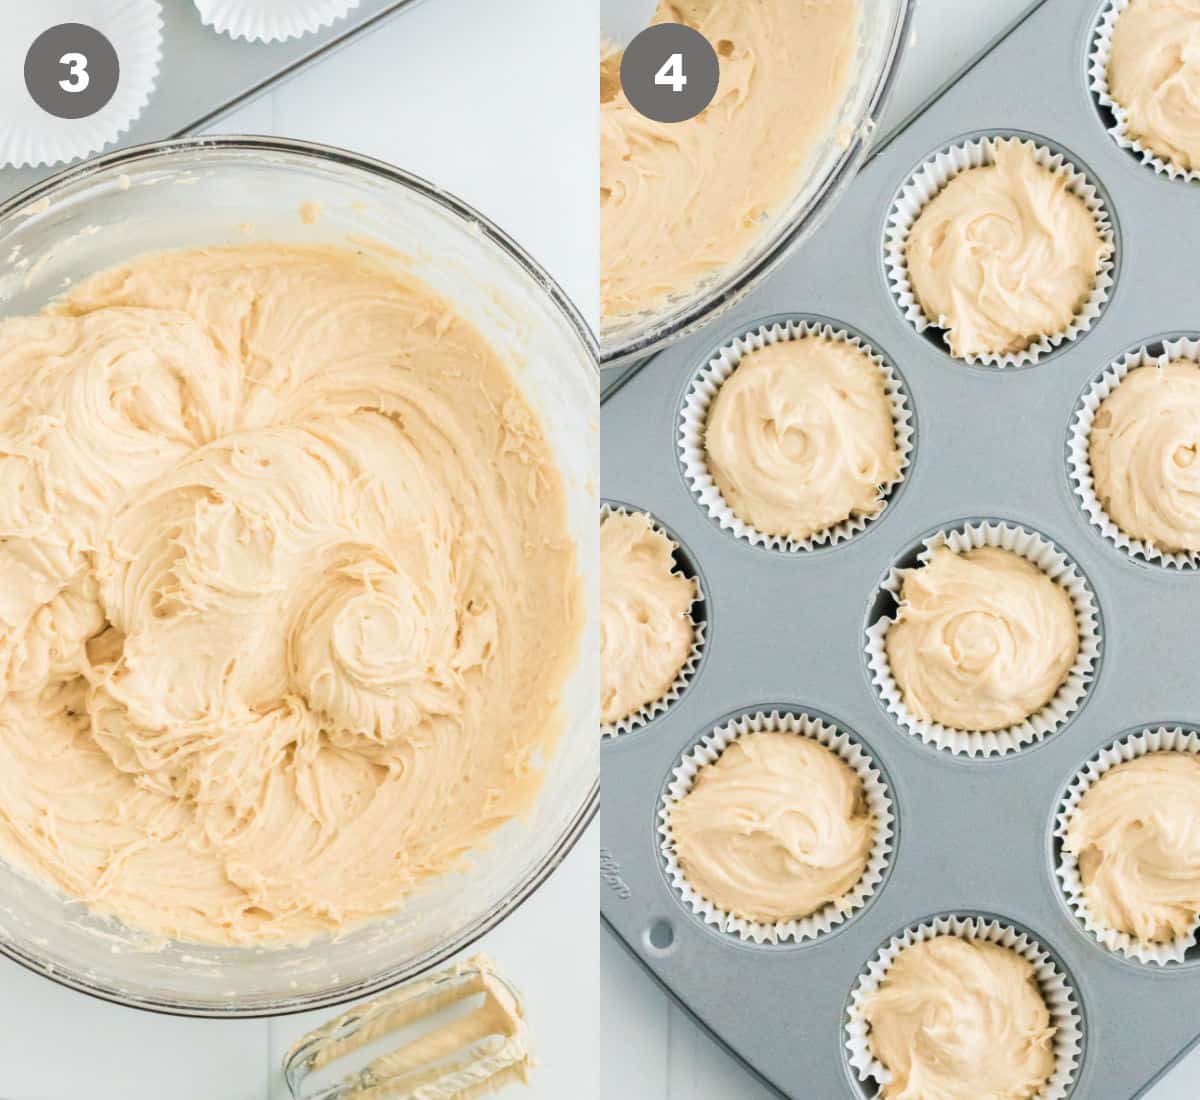 The batter mixed together in a bowl. Muffin tins filled with batter.